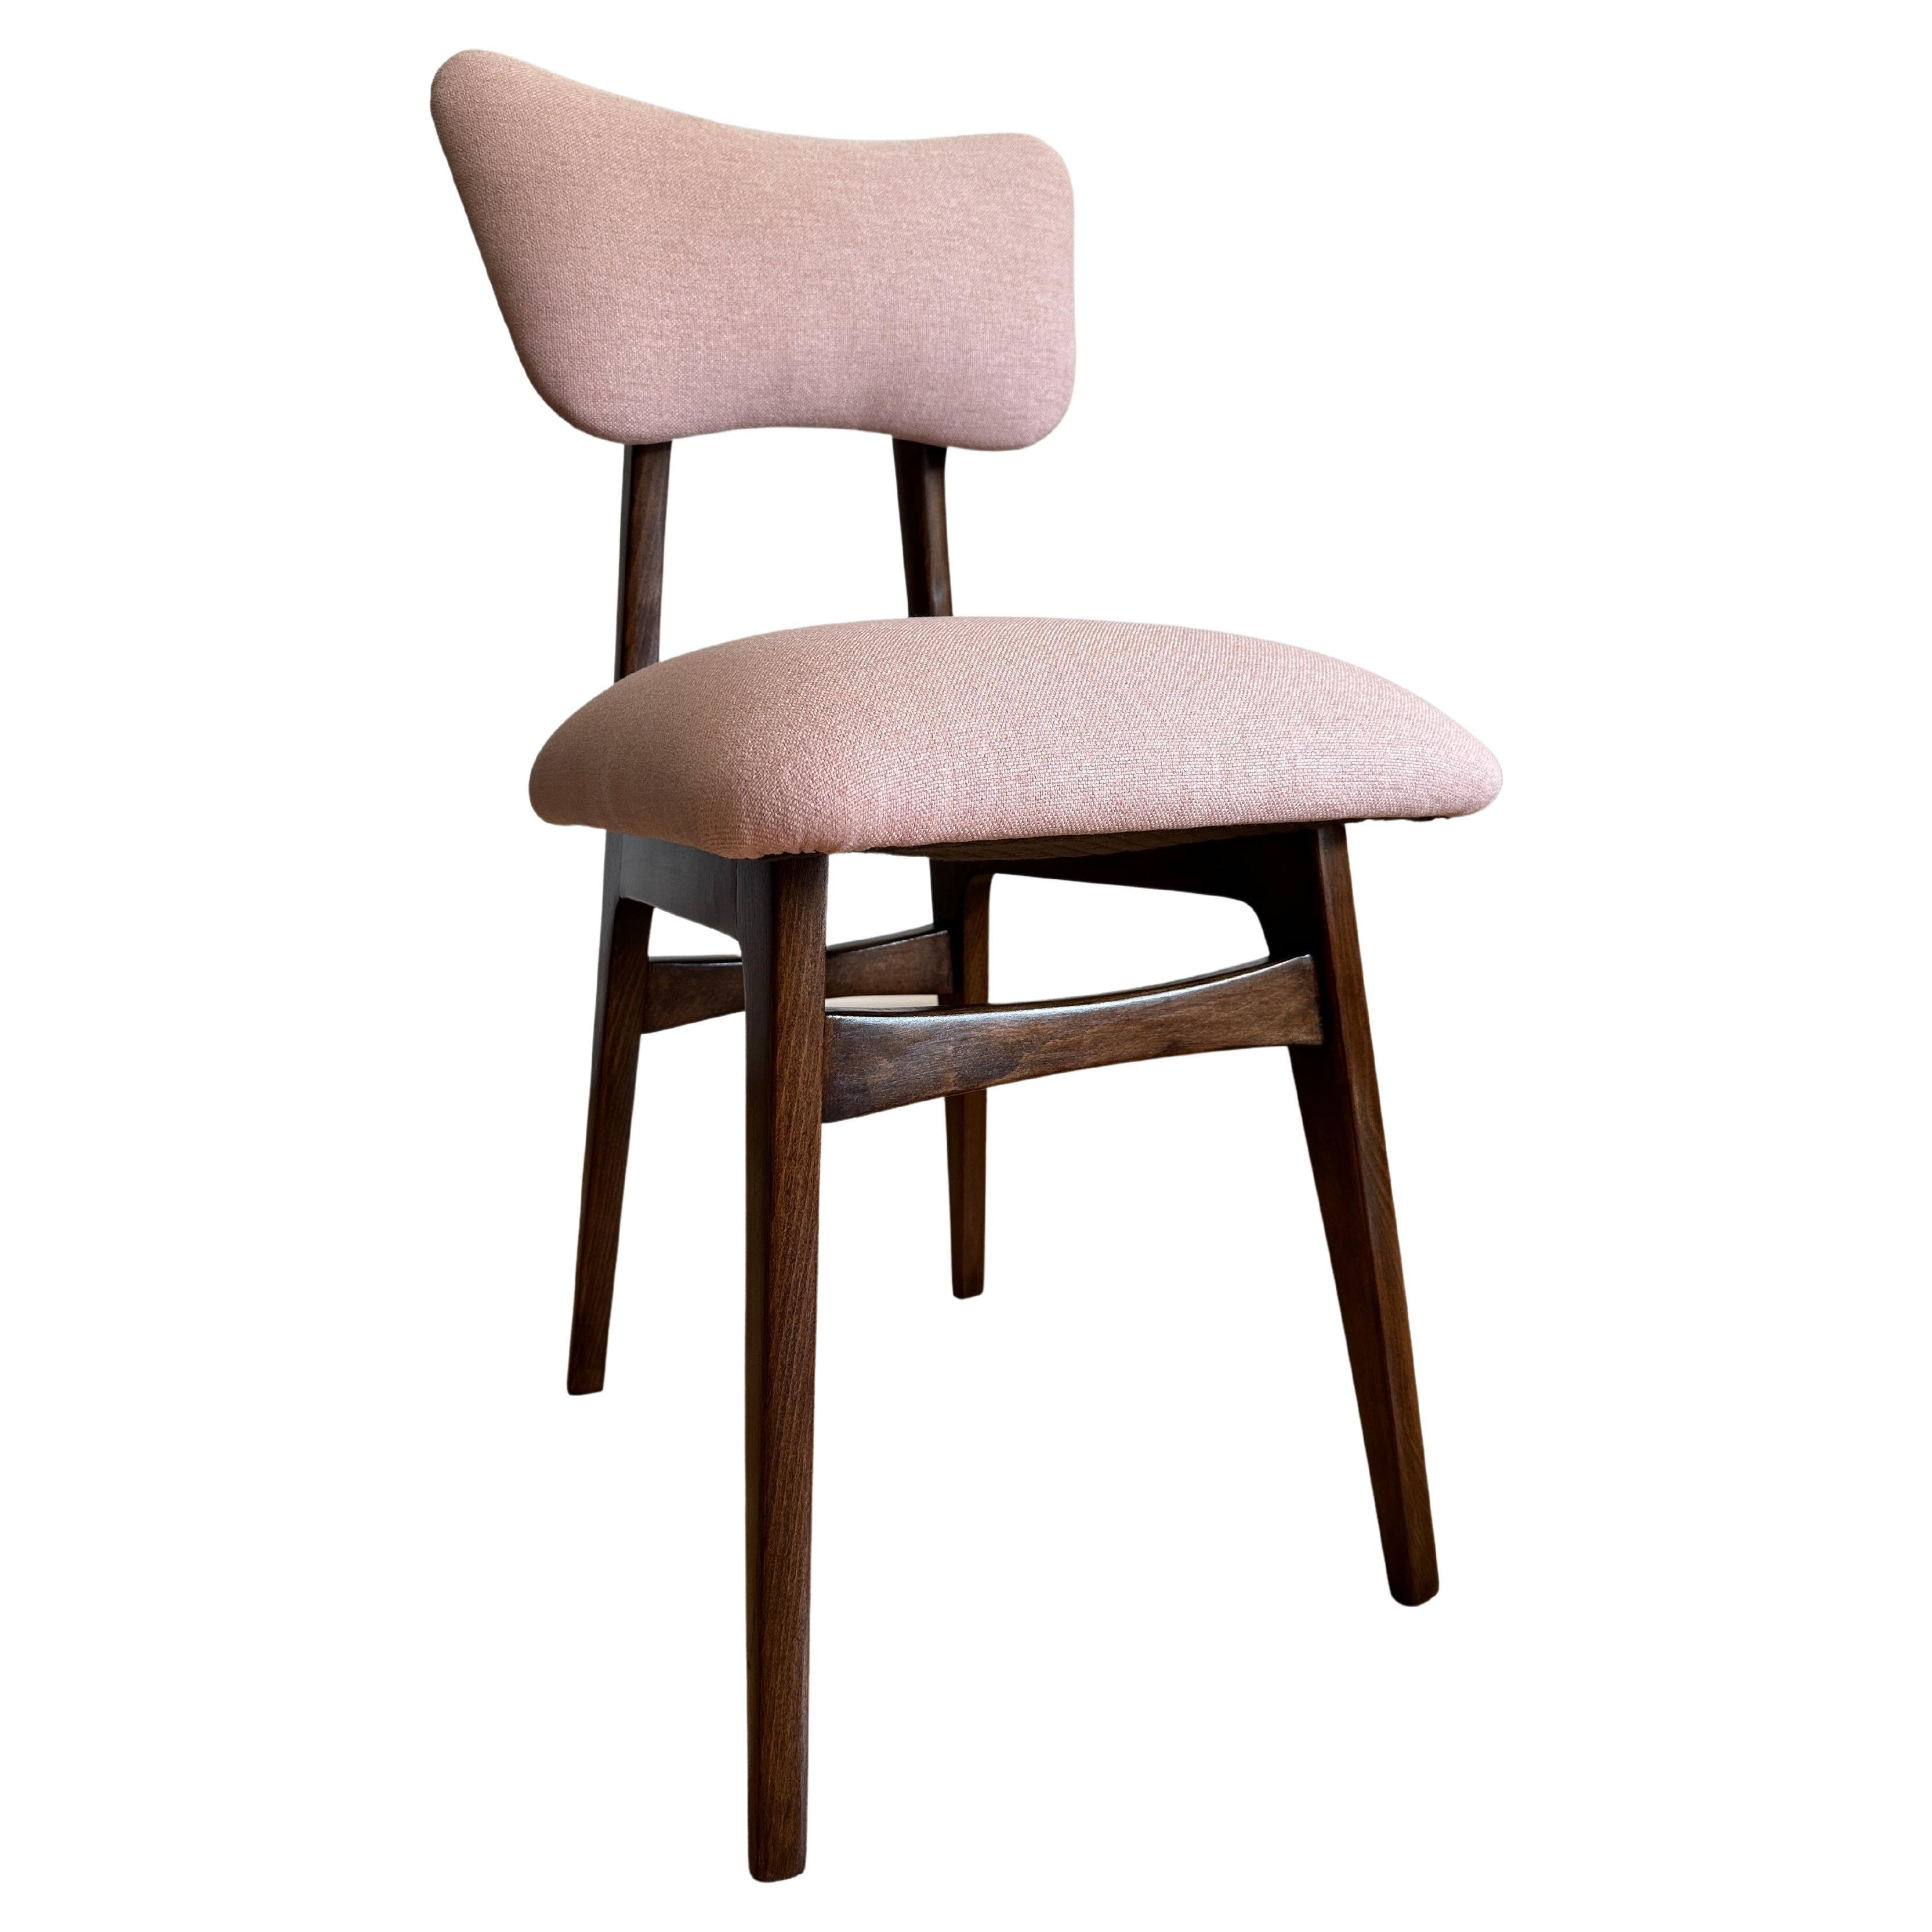 Midcentury Wooden Dining Chair in Light Pink Upholstery, Europe, 1960s For Sale